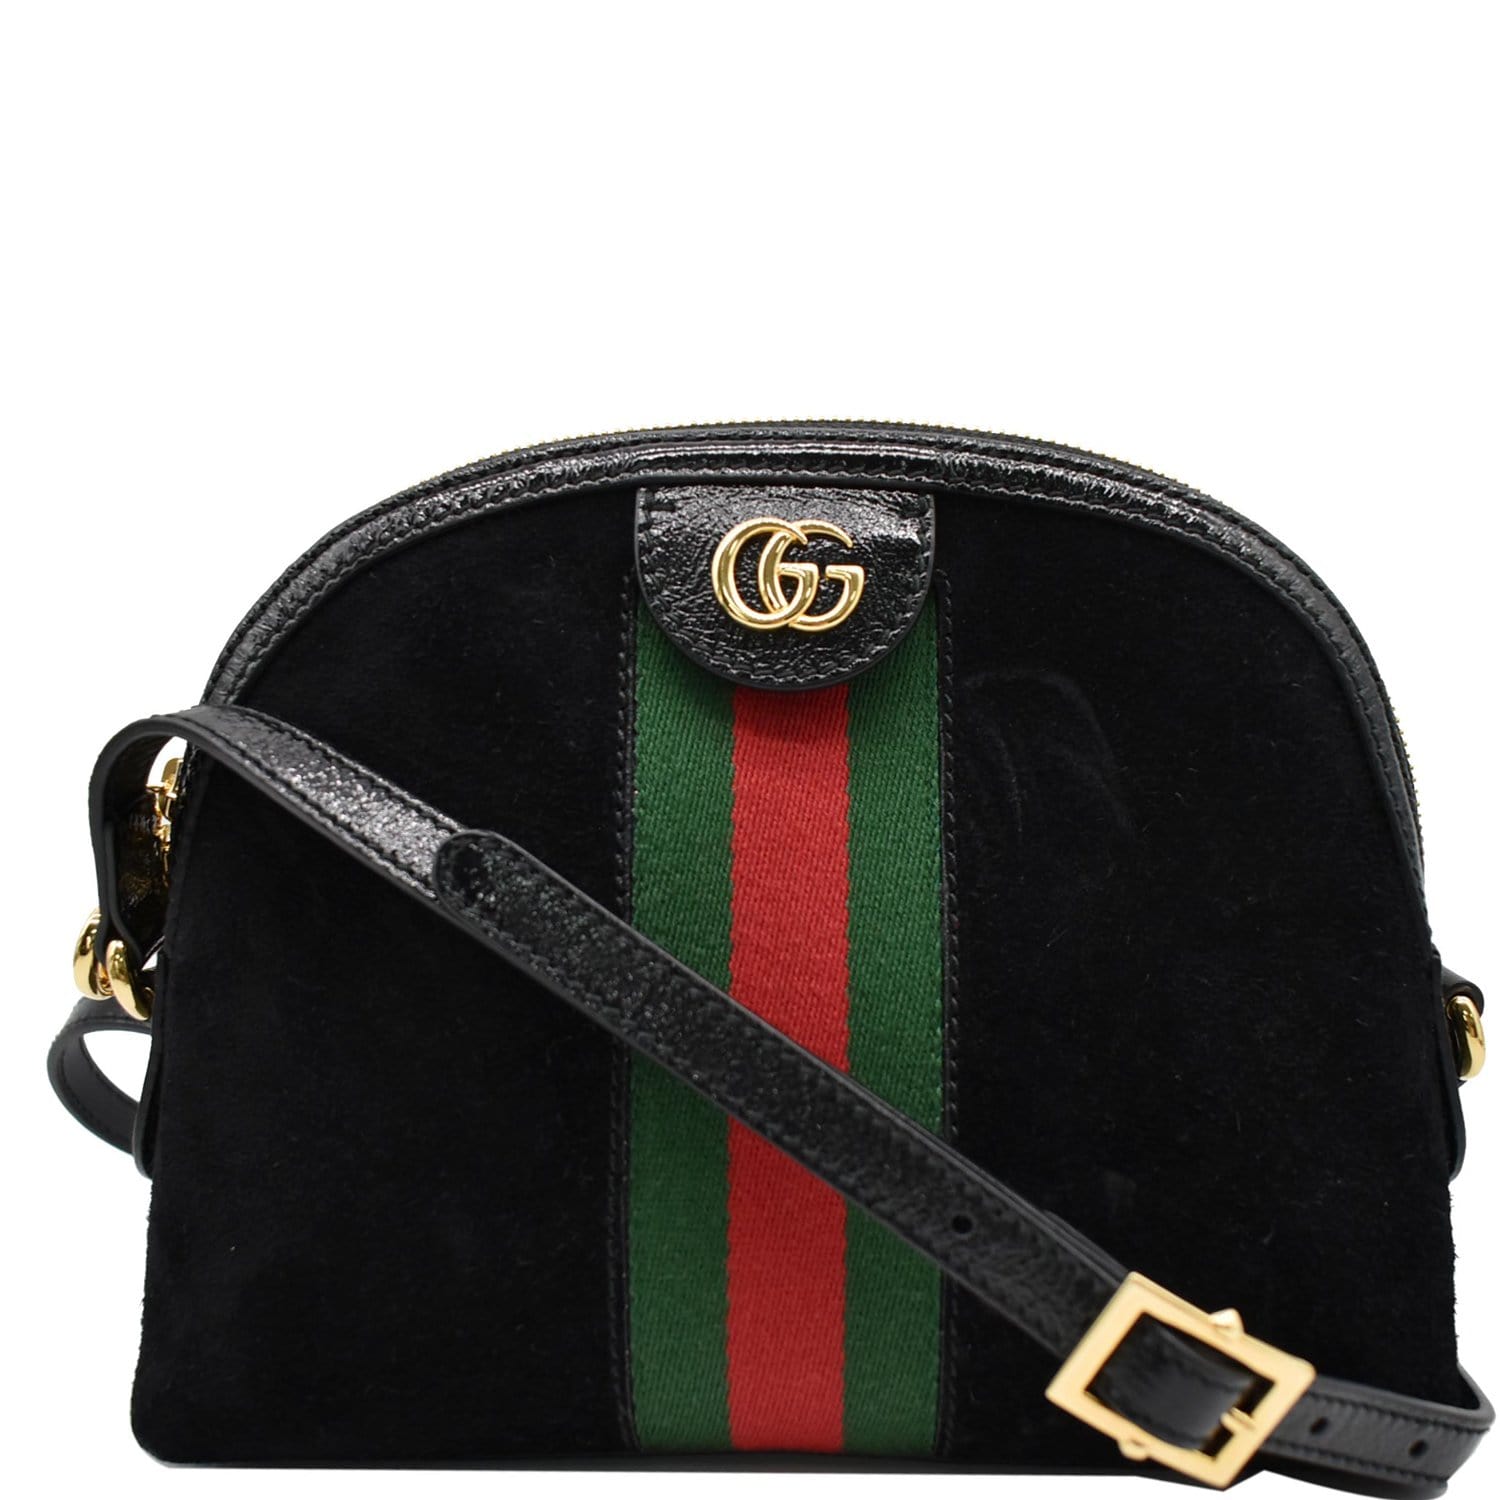 Gucci, Bags, Gucci Black Messenger Bag For Sale Never Used